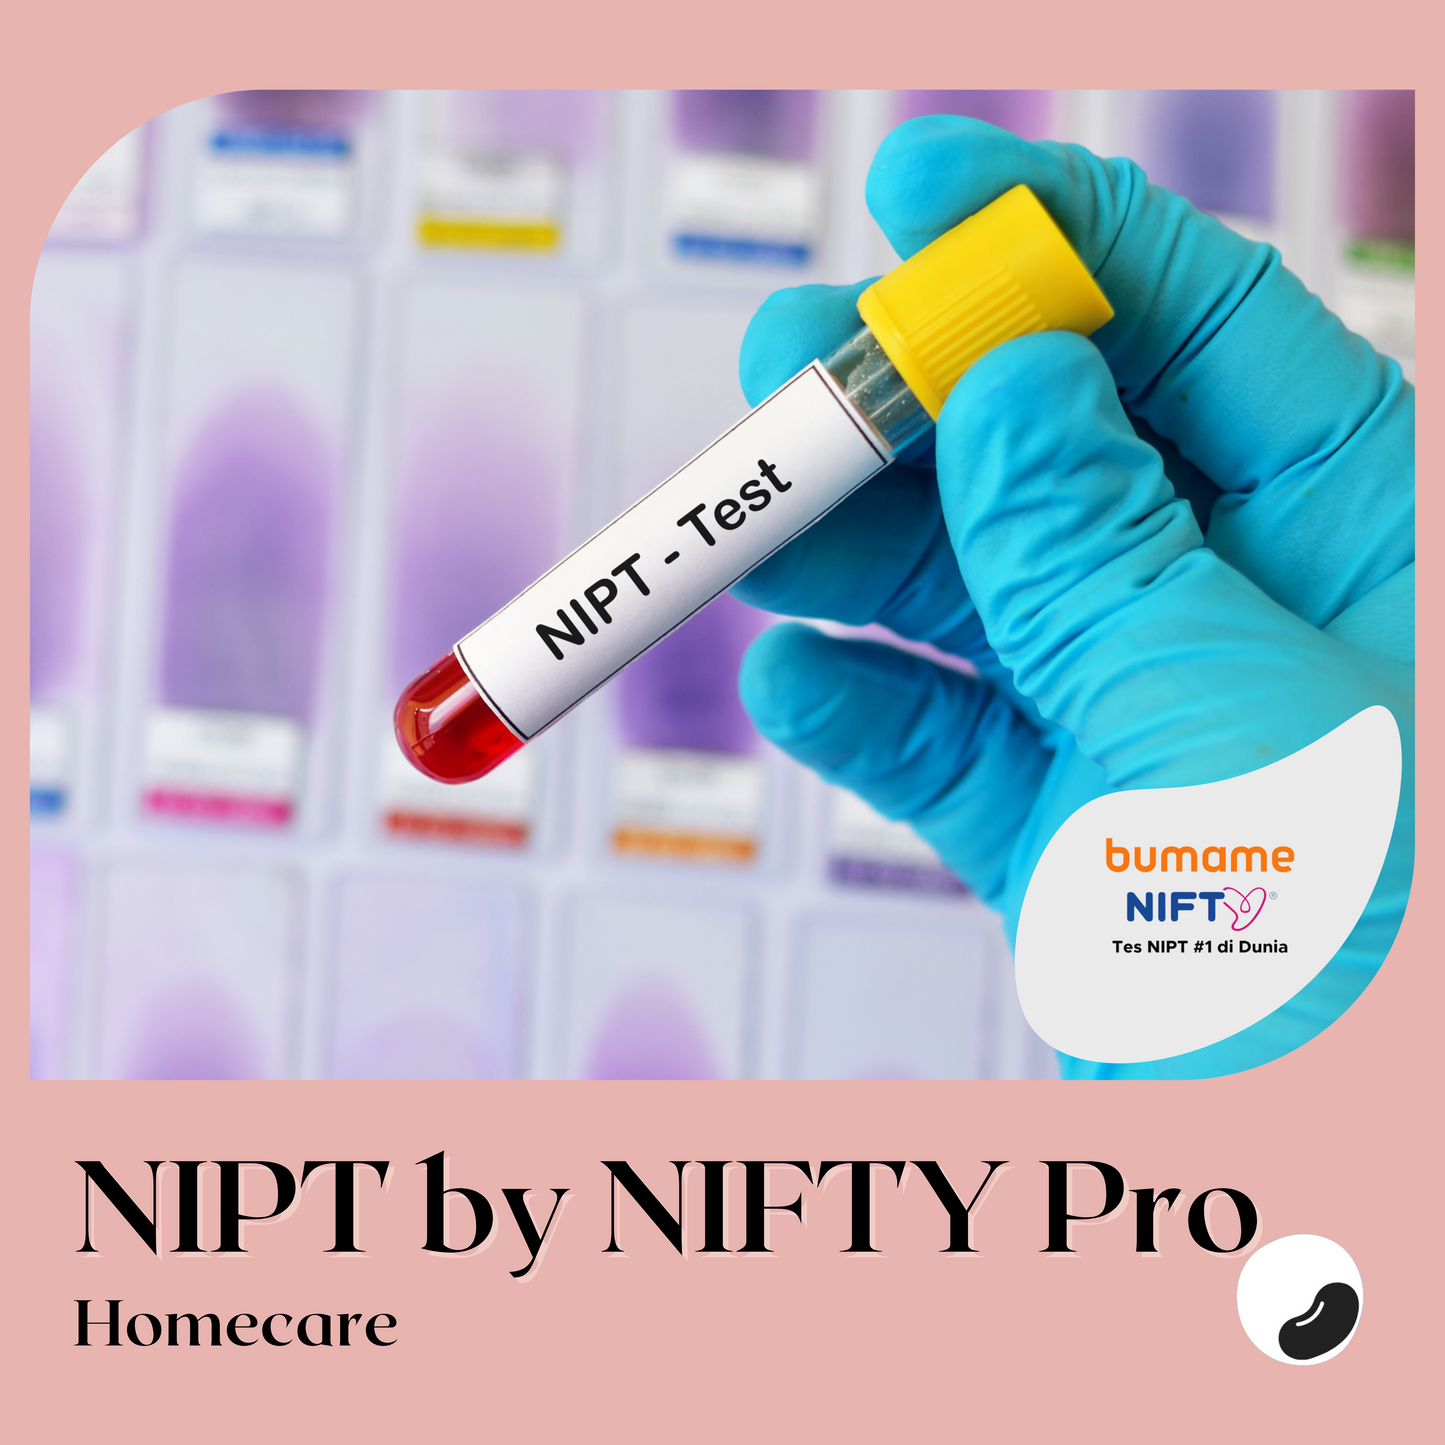 NIPT test by NIFTY Pro (Homecare)